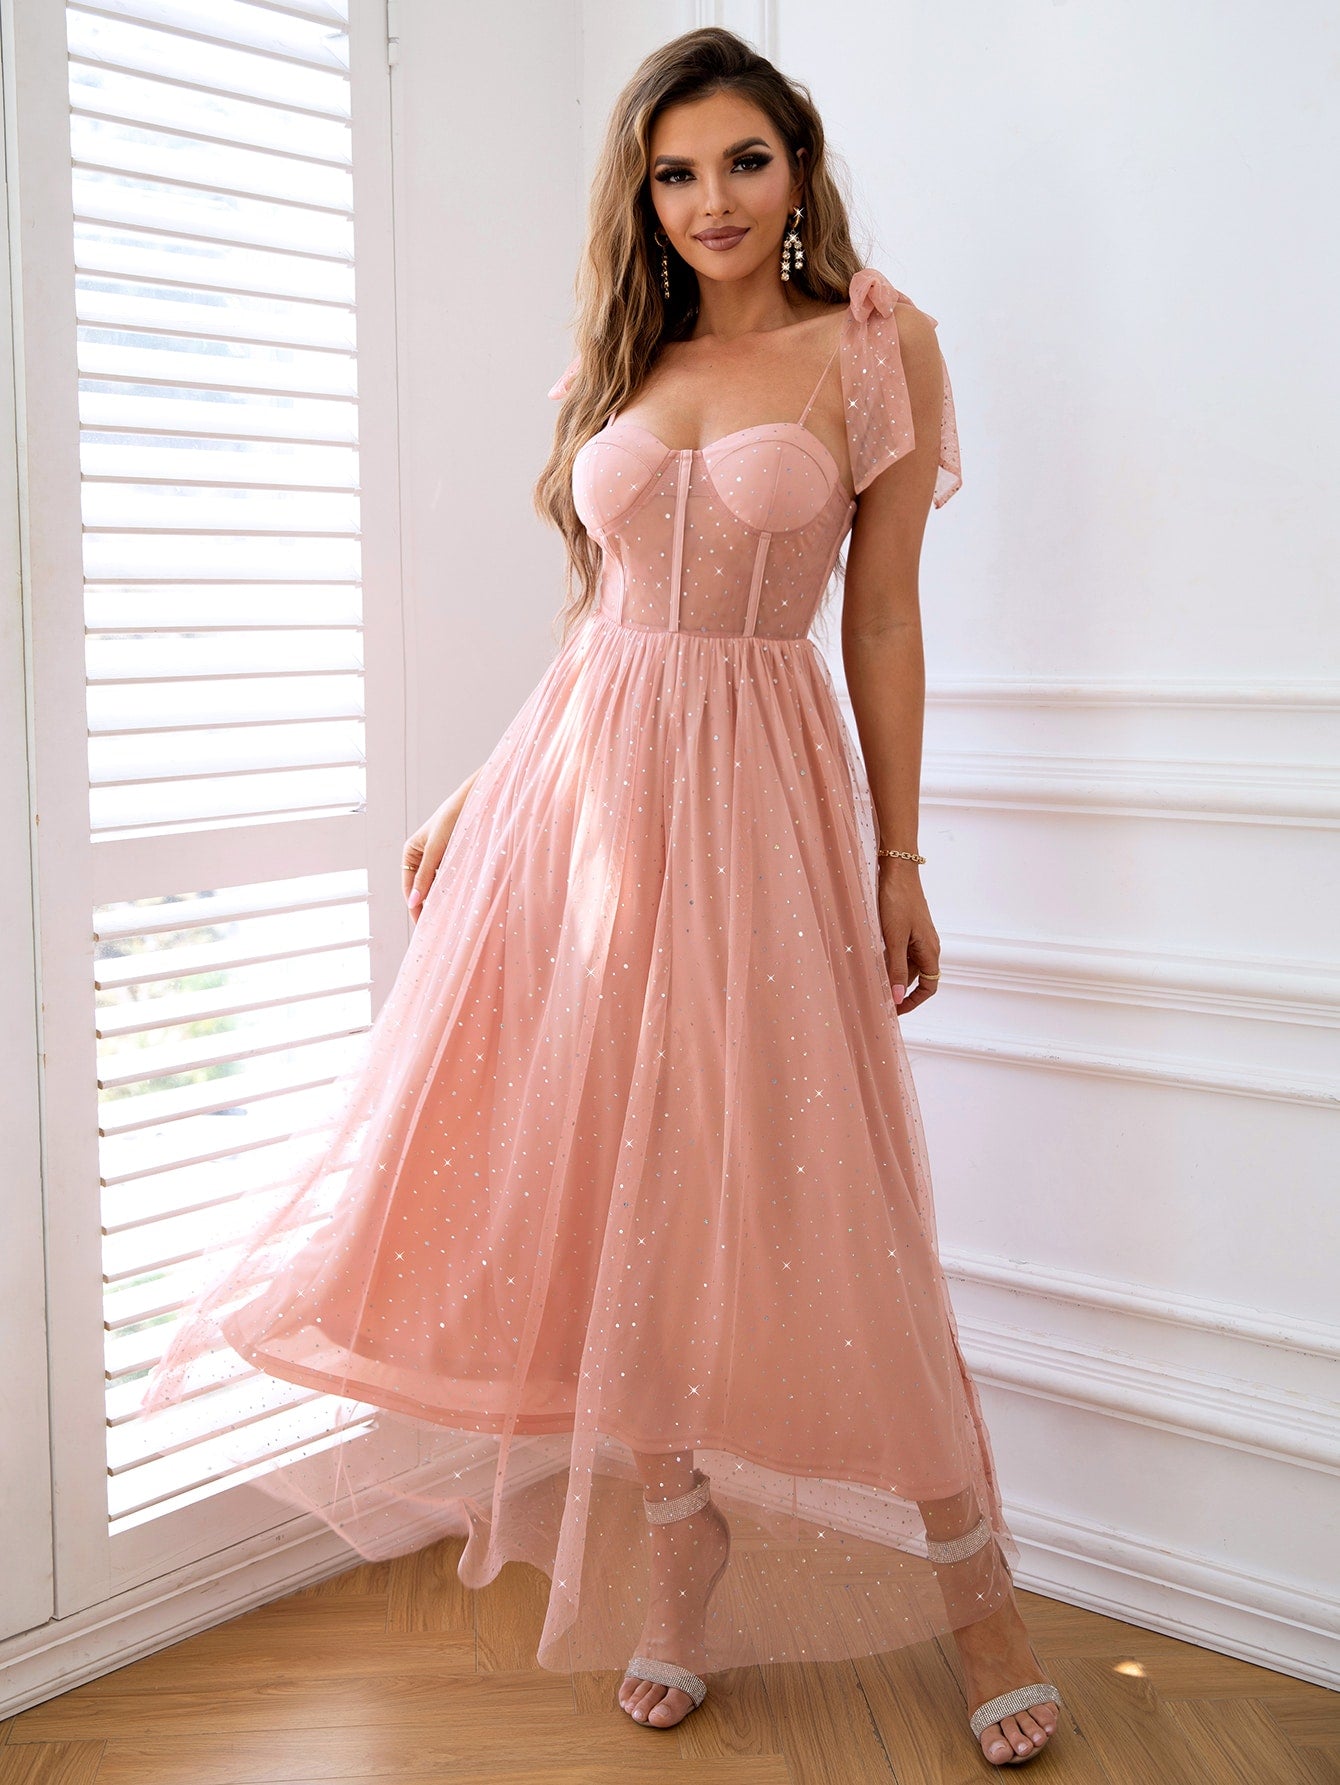 Baby in a Corner Tulle Mesh Bustier Party Dress in Pink